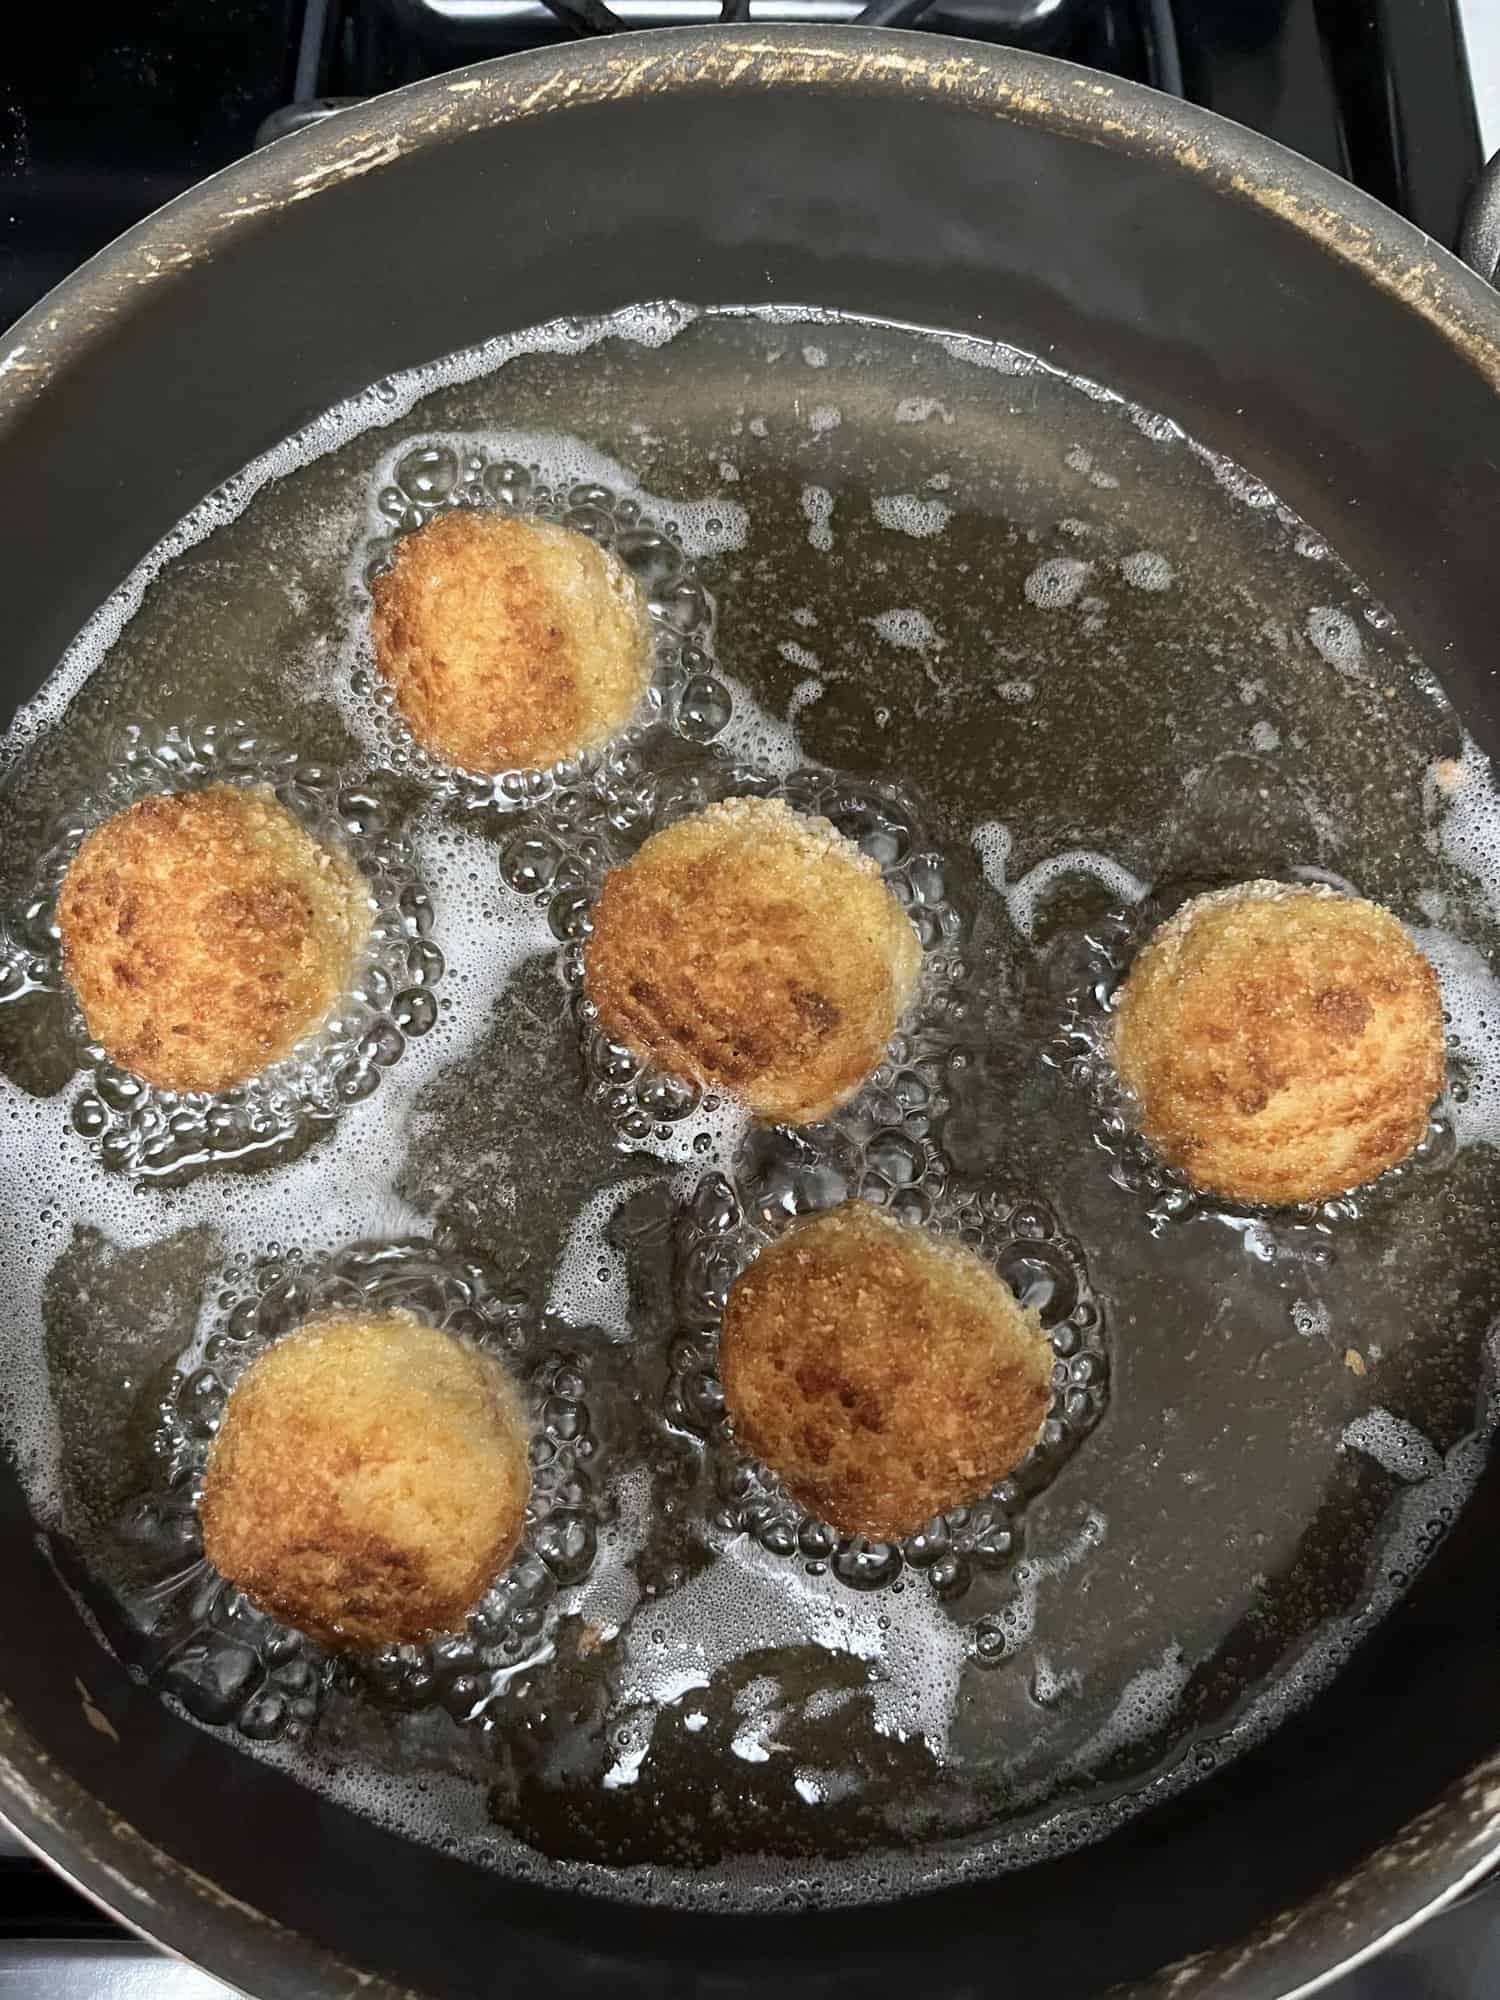 six croquettes frying in oil after flipping